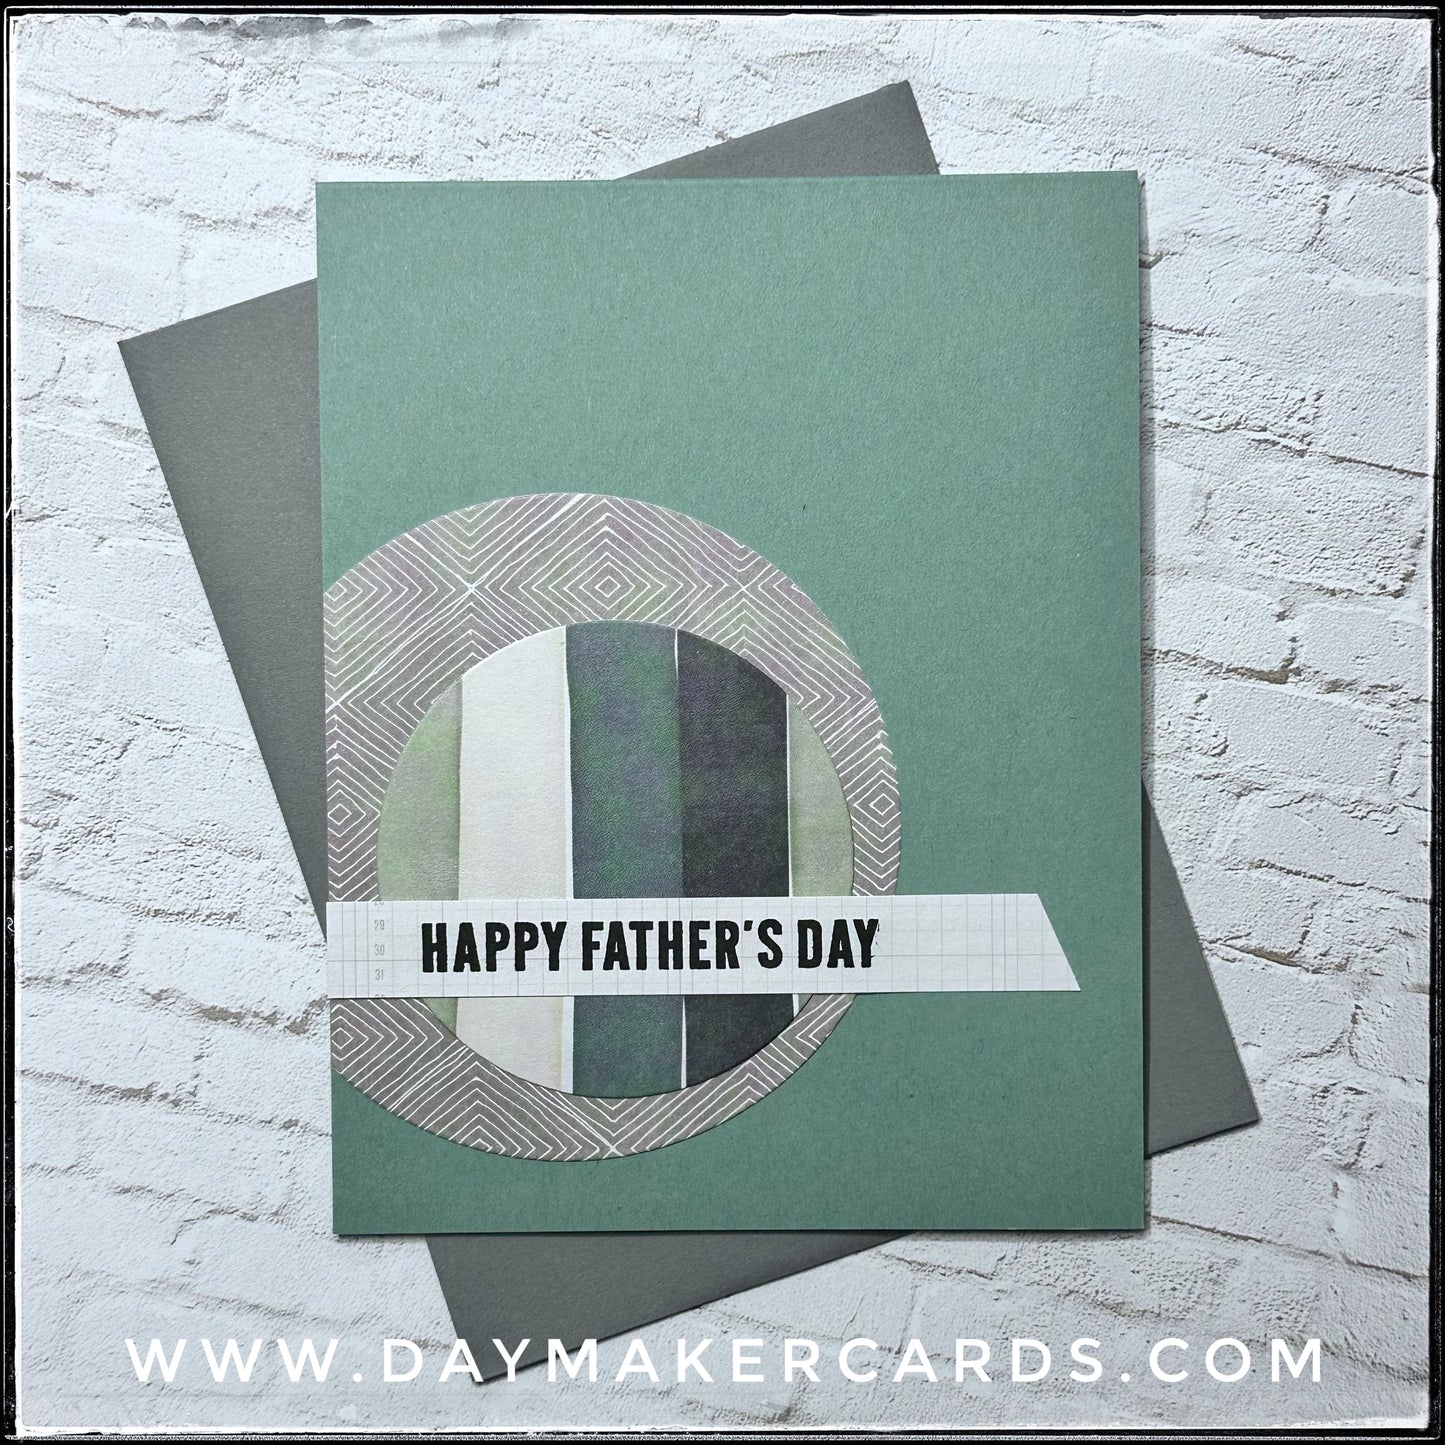 Happy Father's Day Handmade Card